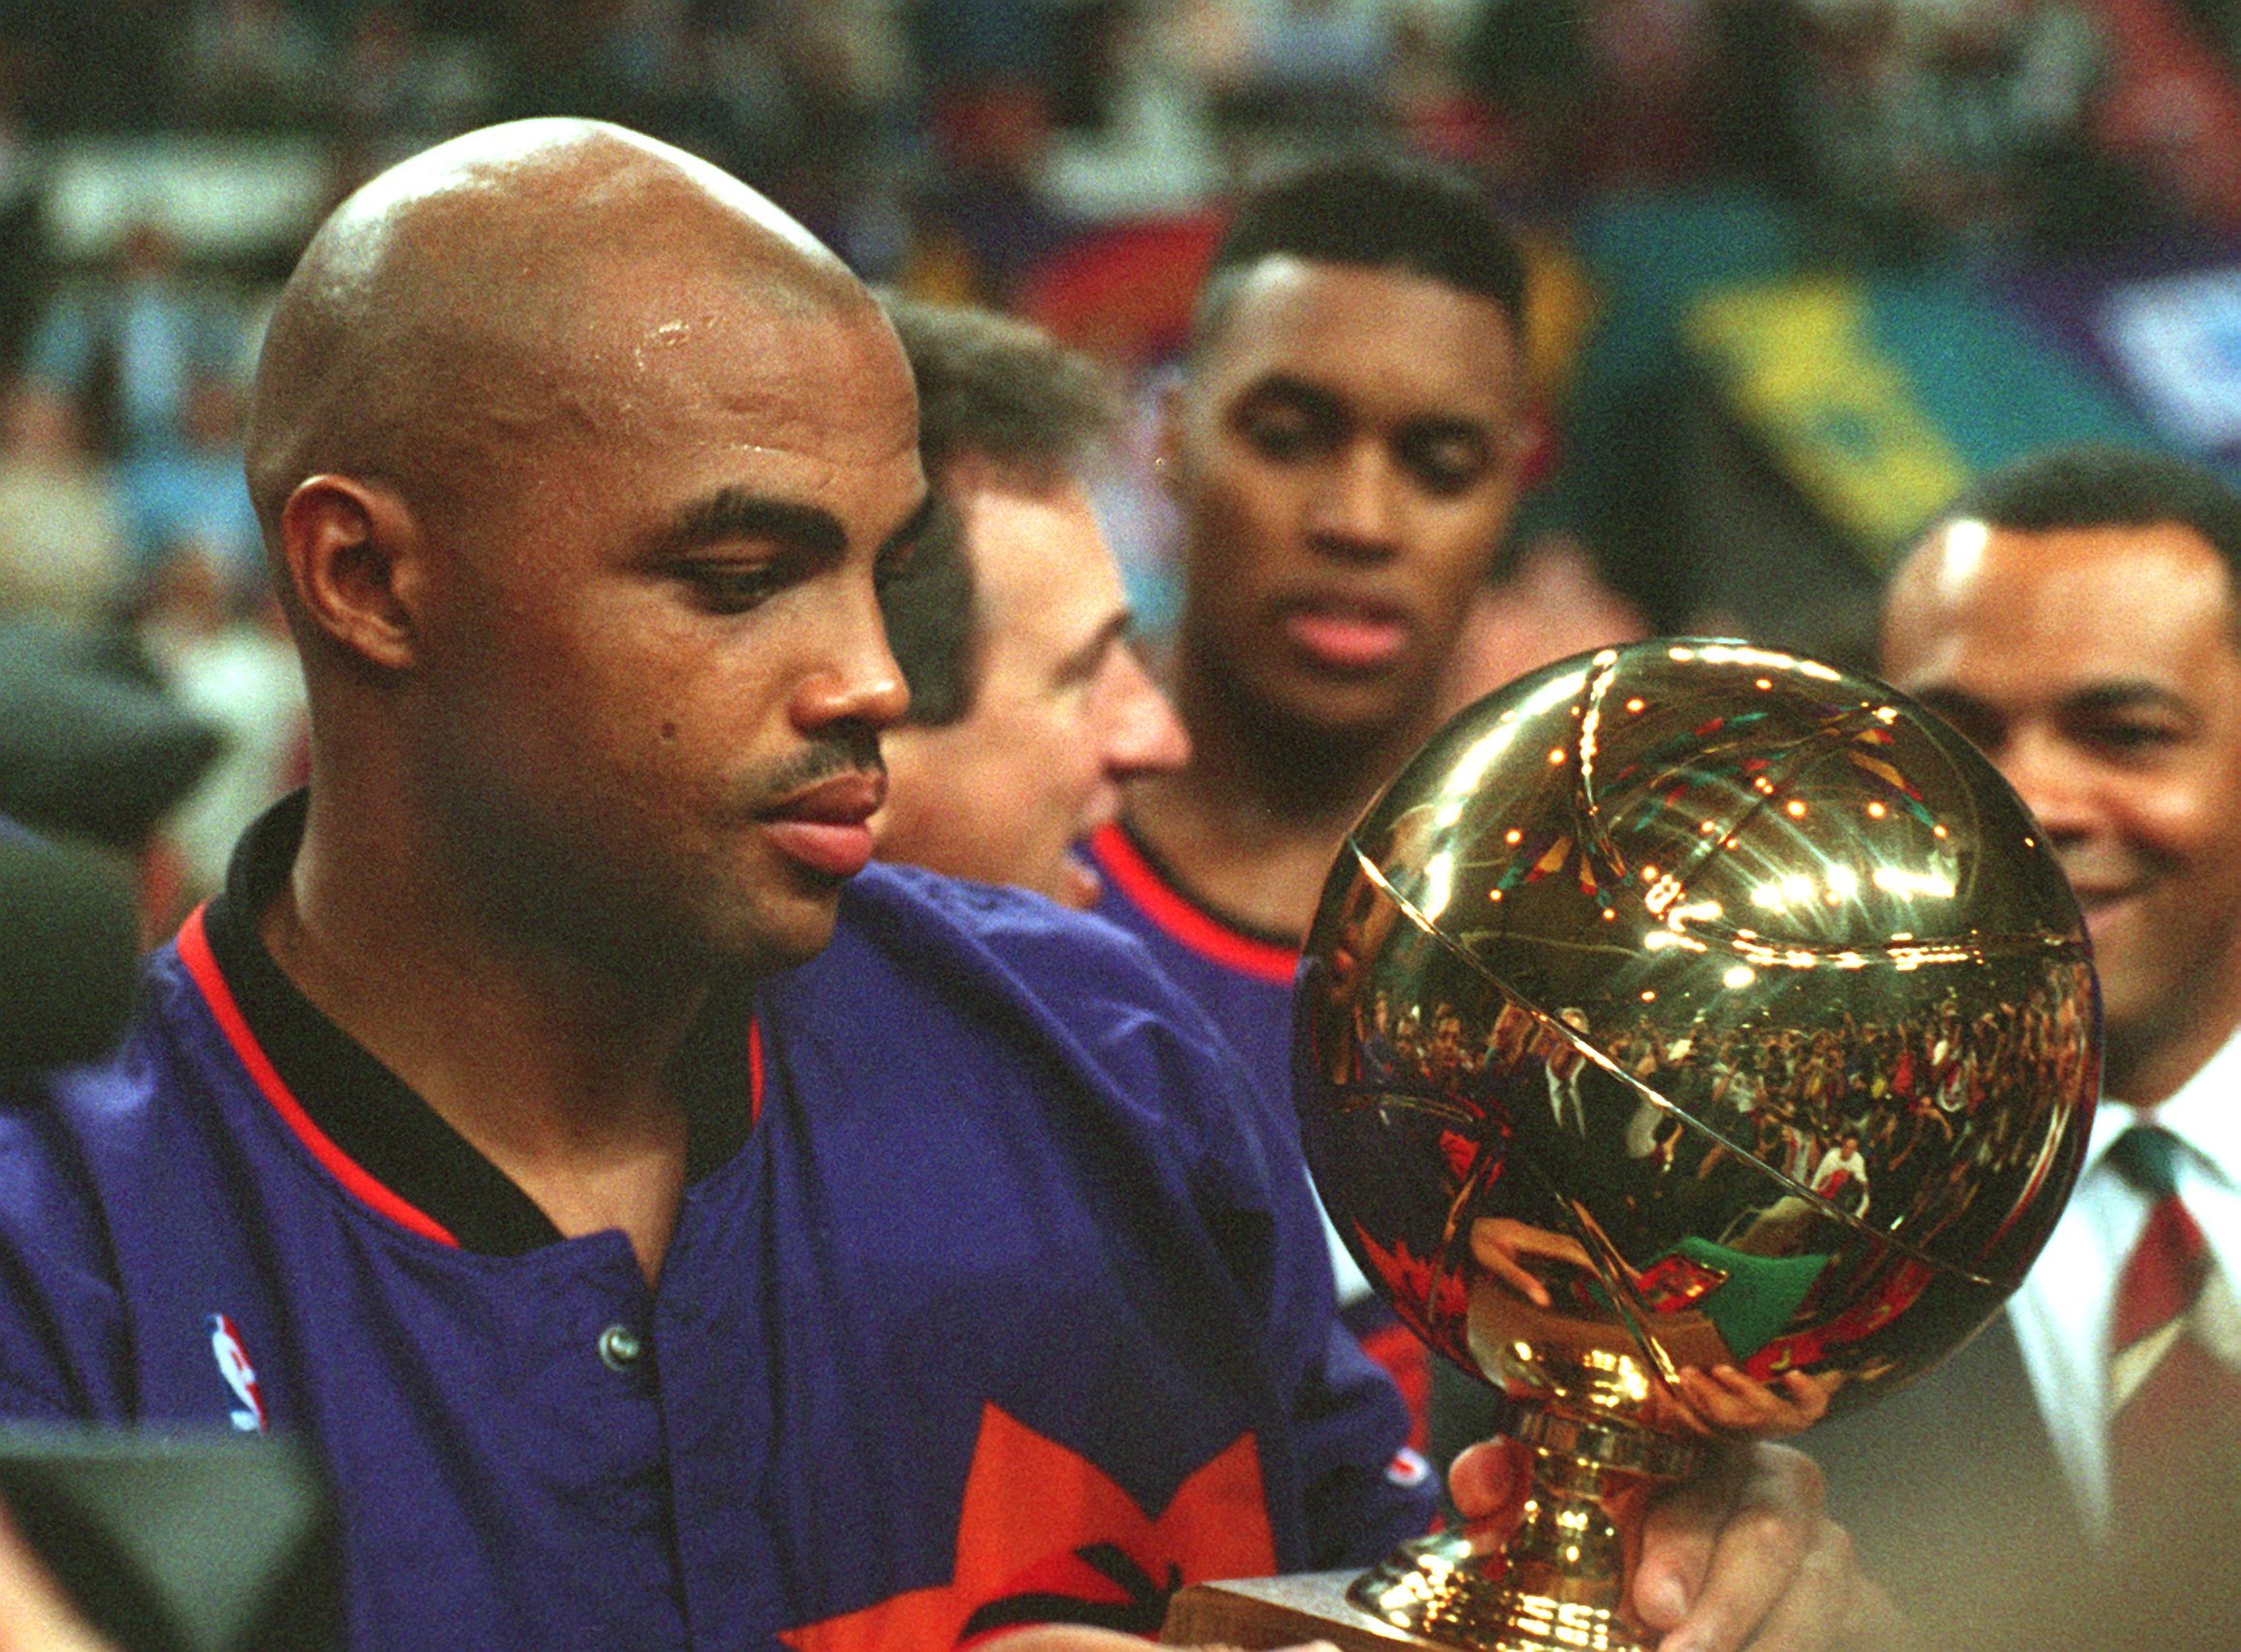 Former Phoenix Suns star Charles Barkley presented with a trophy at the McDonald's Open at October 1993